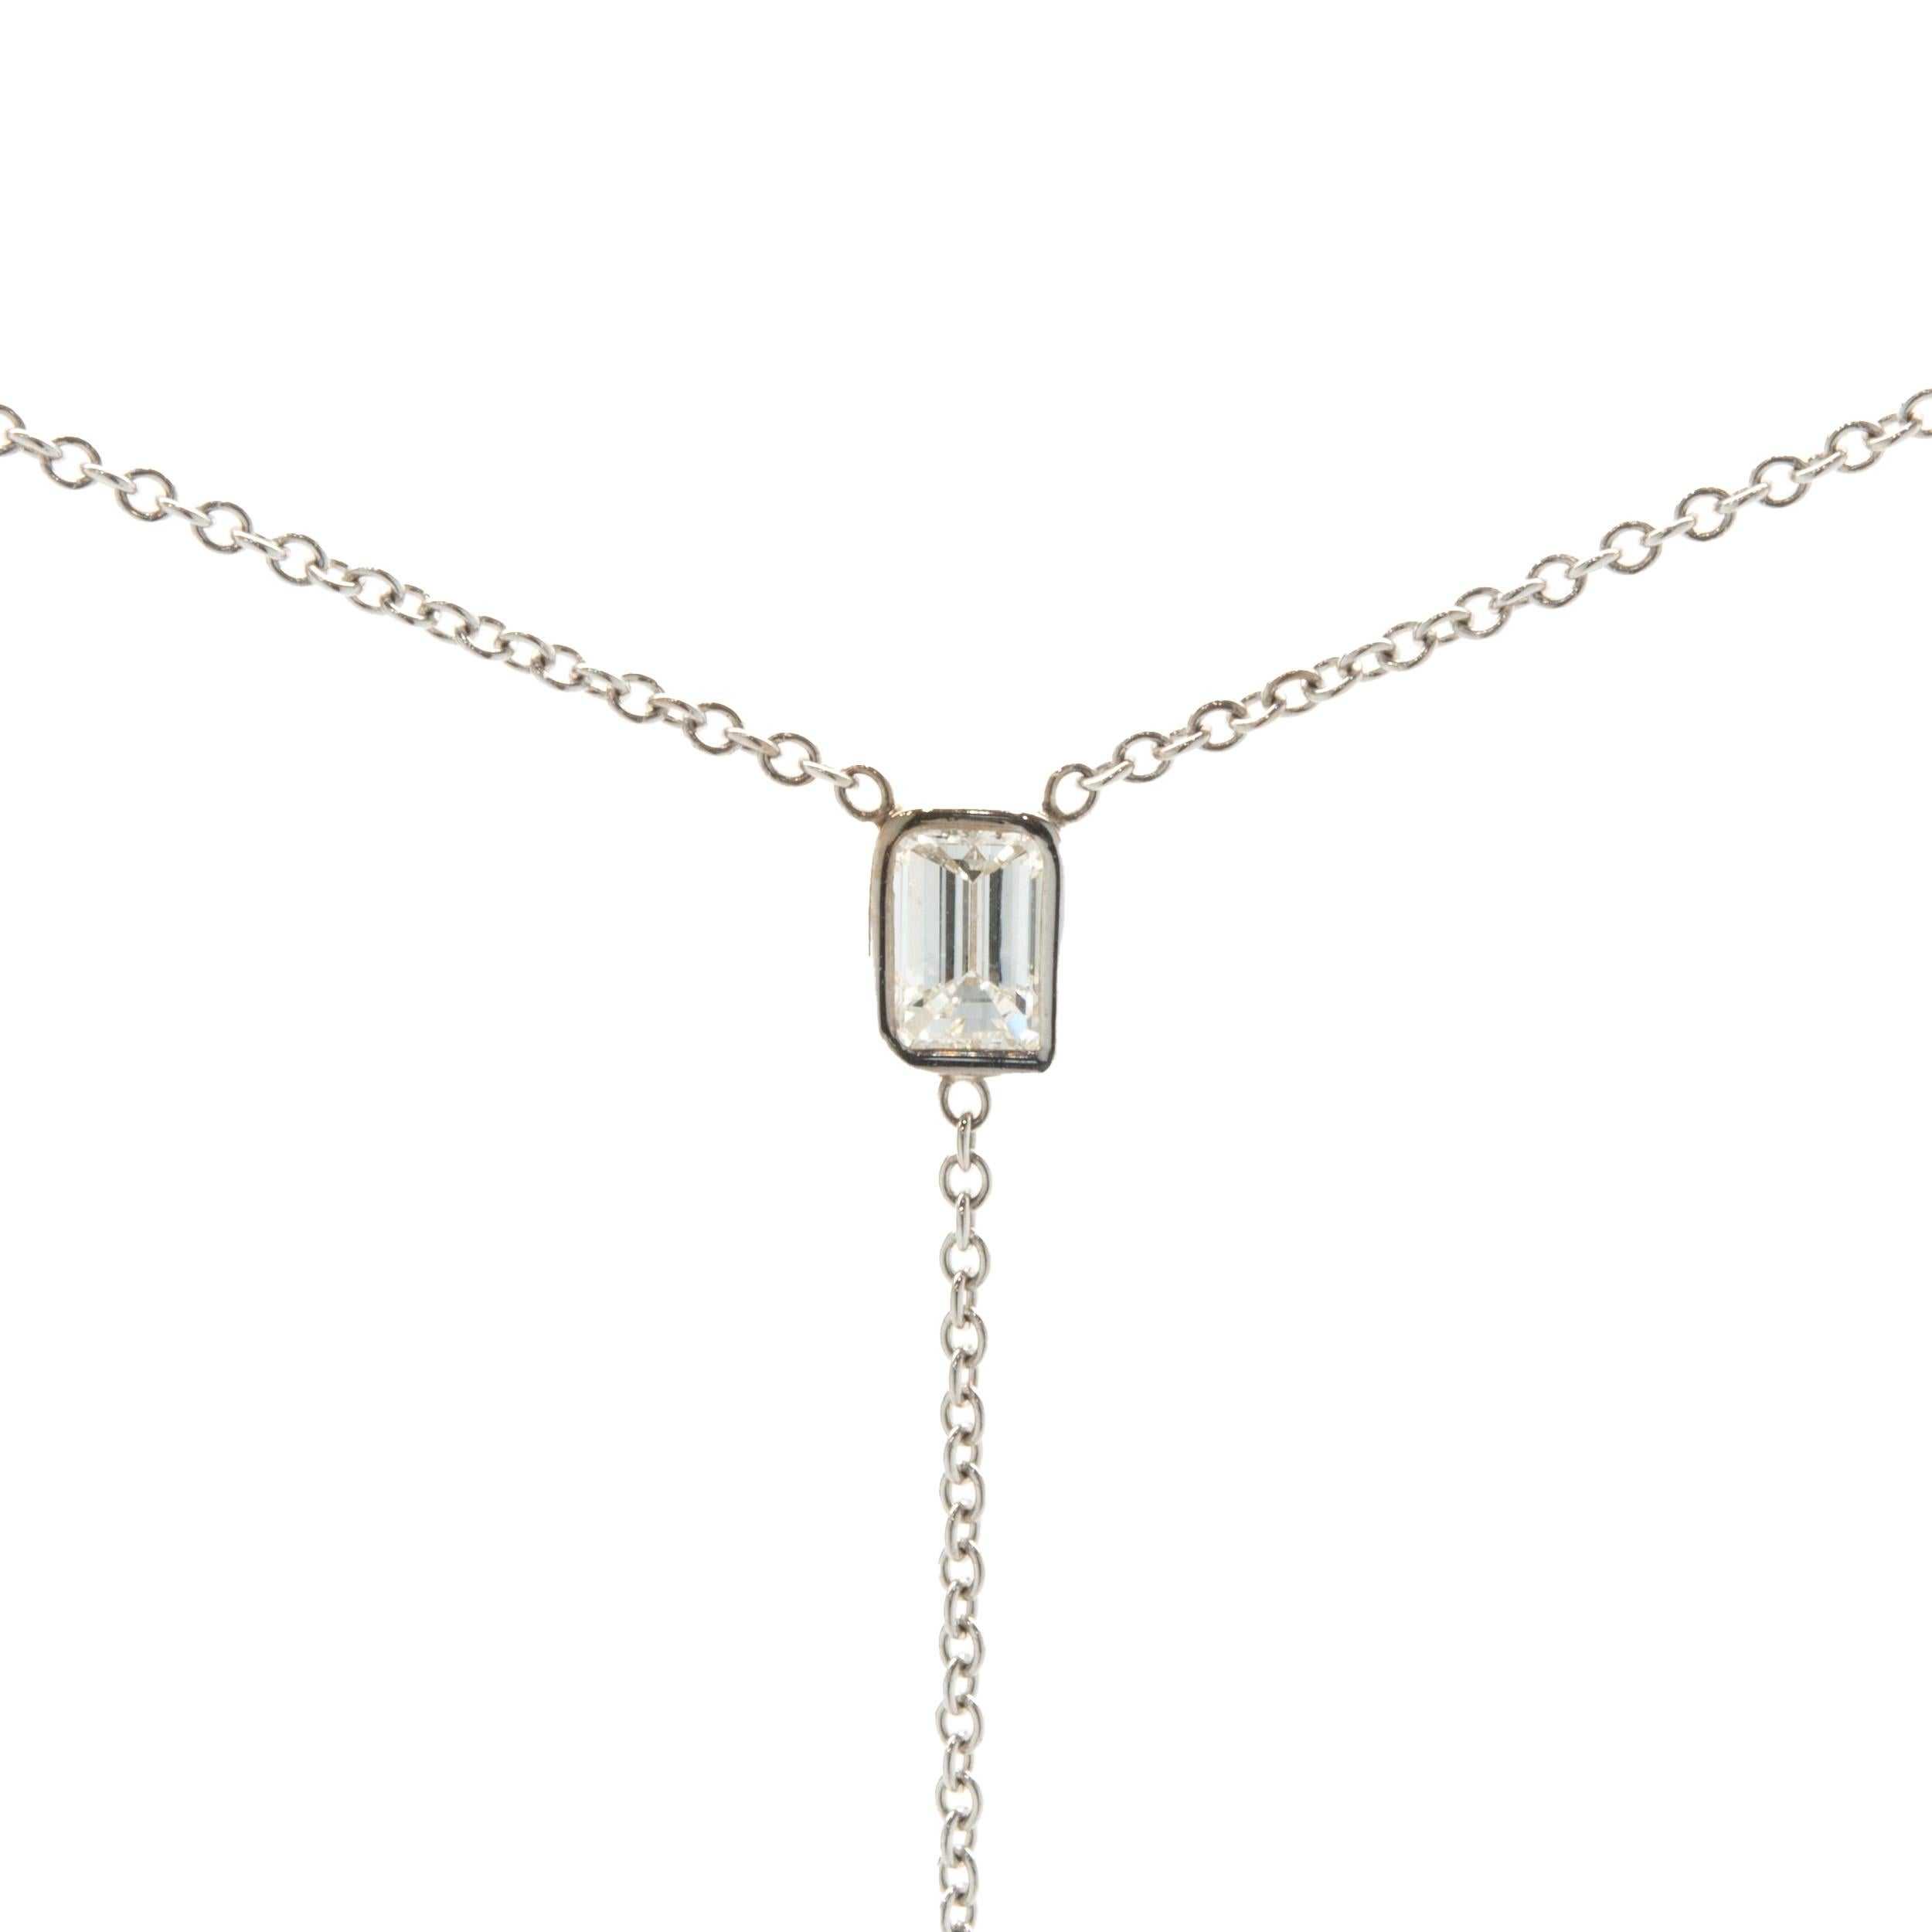 Designer: custom design
Material: 18K white gold
Diamond: 8 round brilliant cut = 1.24cttw
Color: G
Clarity: VS2
Diamond: 3 emerald cut = 1.28cttw
Color: G
Clarity: VS2
Dimensions: necklace measures 24.5-inches in length 
Weight: 3.87 grams
